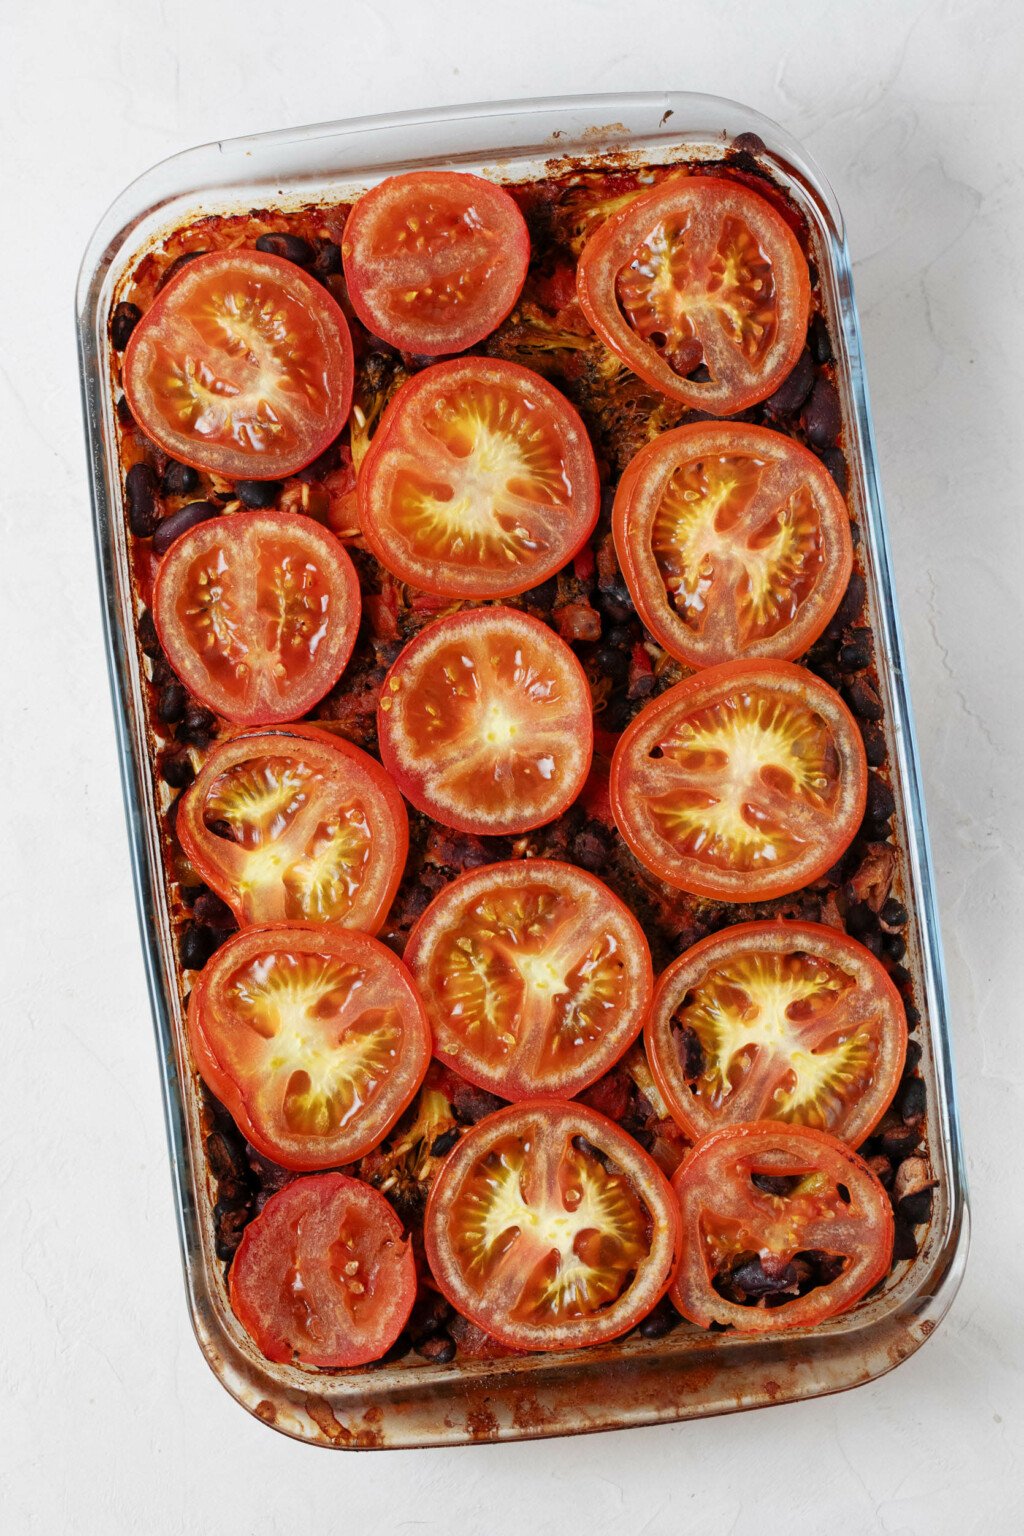 An overhead image of a baked rice dish that has been garnished with thin, round slices of tomato.